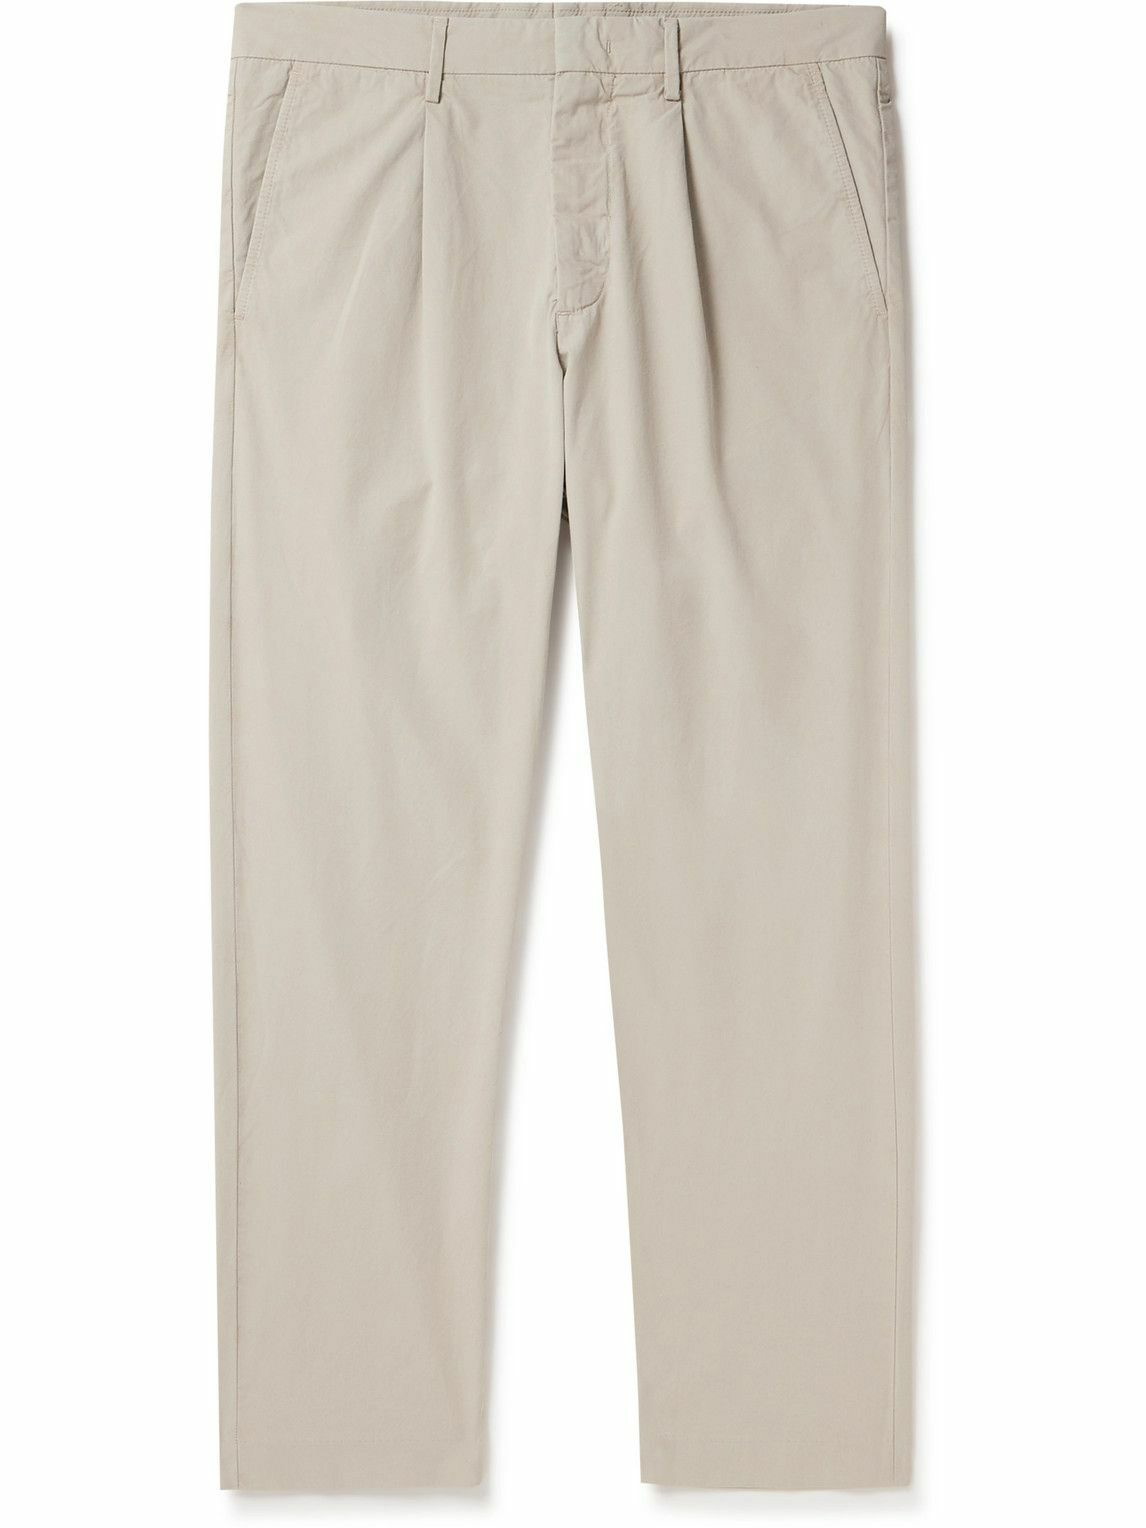 Photo: NN07 - Bill 1080 Tapered Pleated Organic Cotton-Blend Trousers - Neutrals